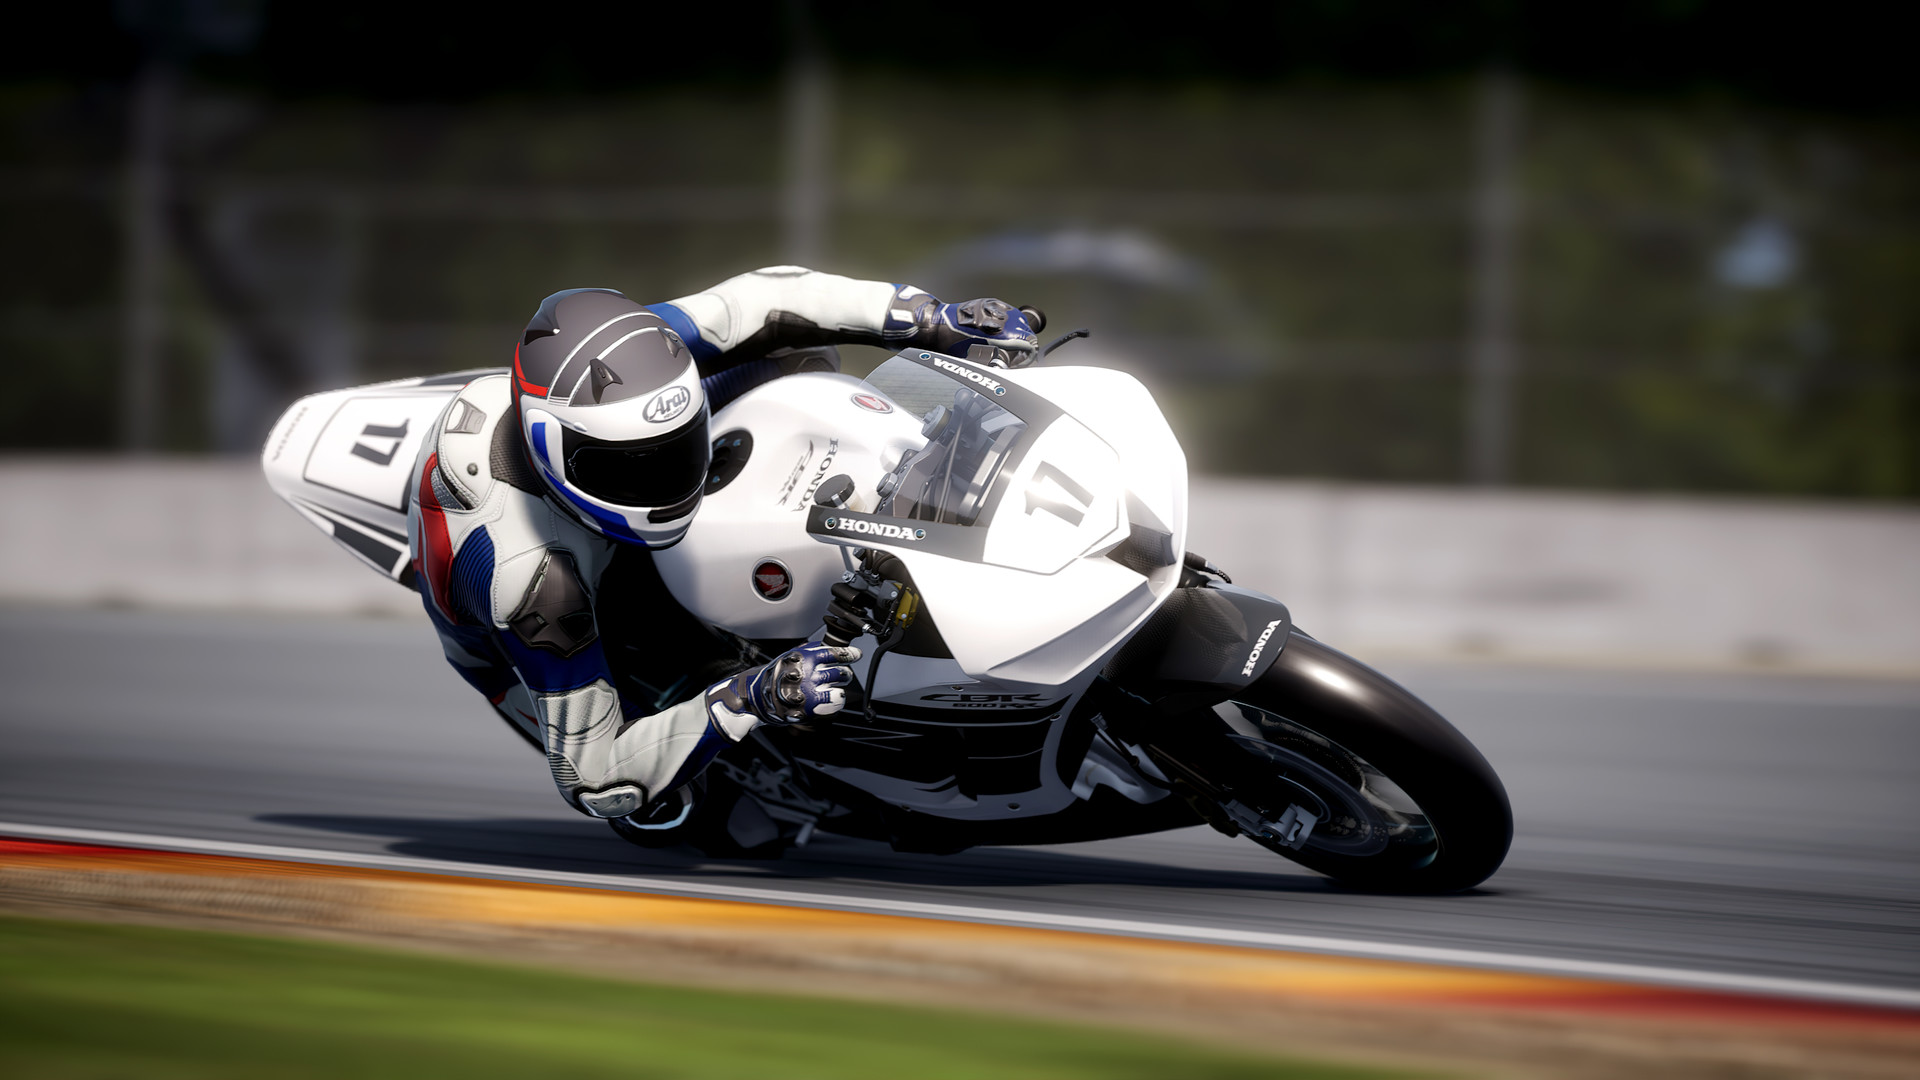 RIDE 4 - 600cc Passion Featured Screenshot #1